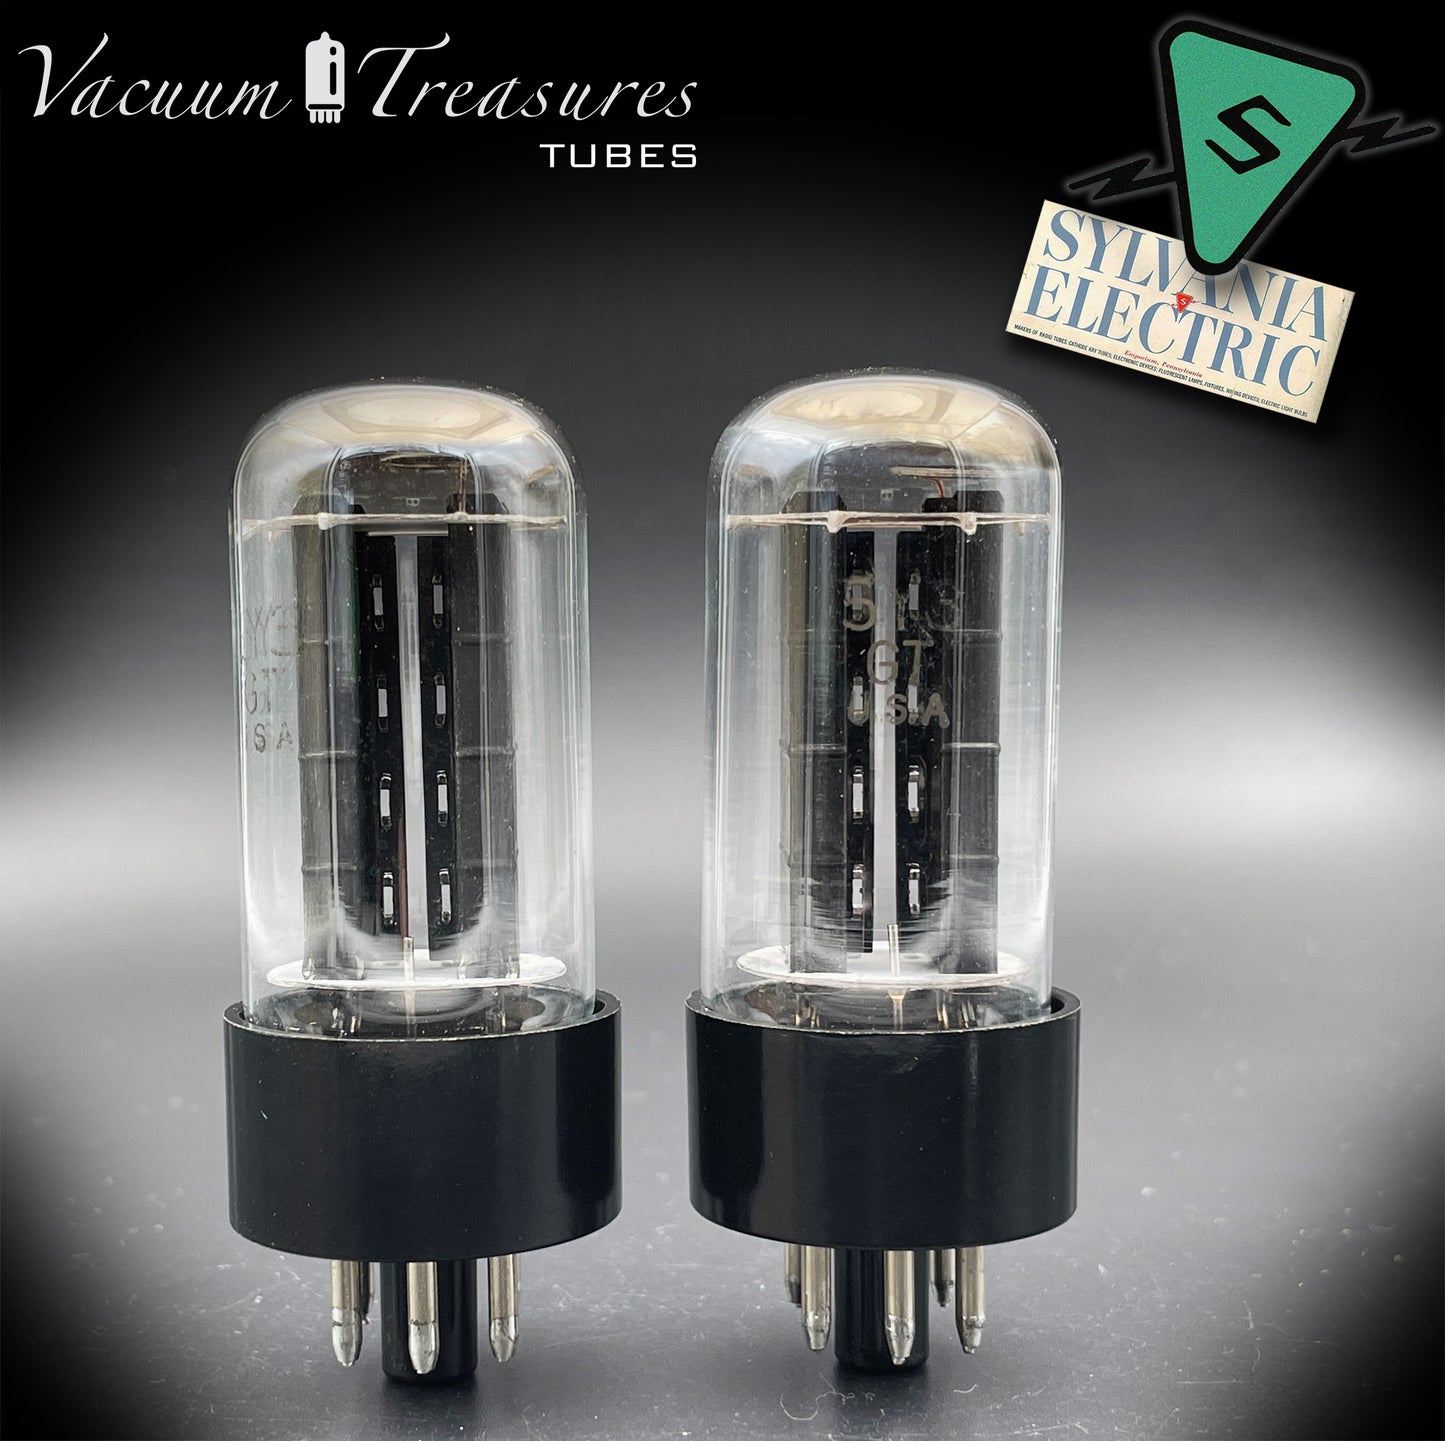 5Y3 GT ( 5Z2P ) SYLVANIA NOS NIB Black Plates O Getter Matched Tubes Rectifiers Made in USA